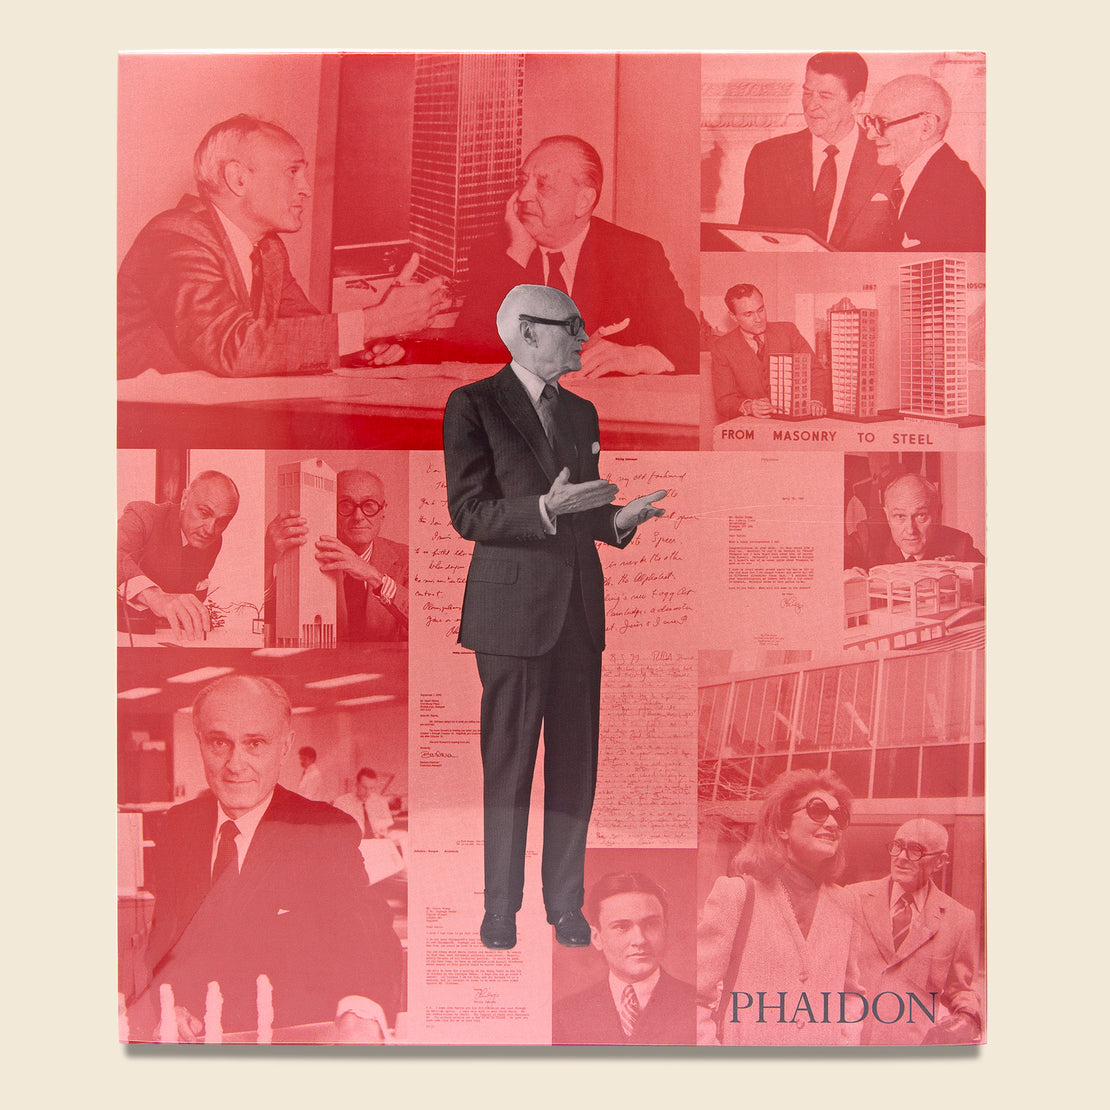 Phillip Johnson: A Visual Biography - Ian Volner - Bookstore - STAG Provisions - Home - Library - Book